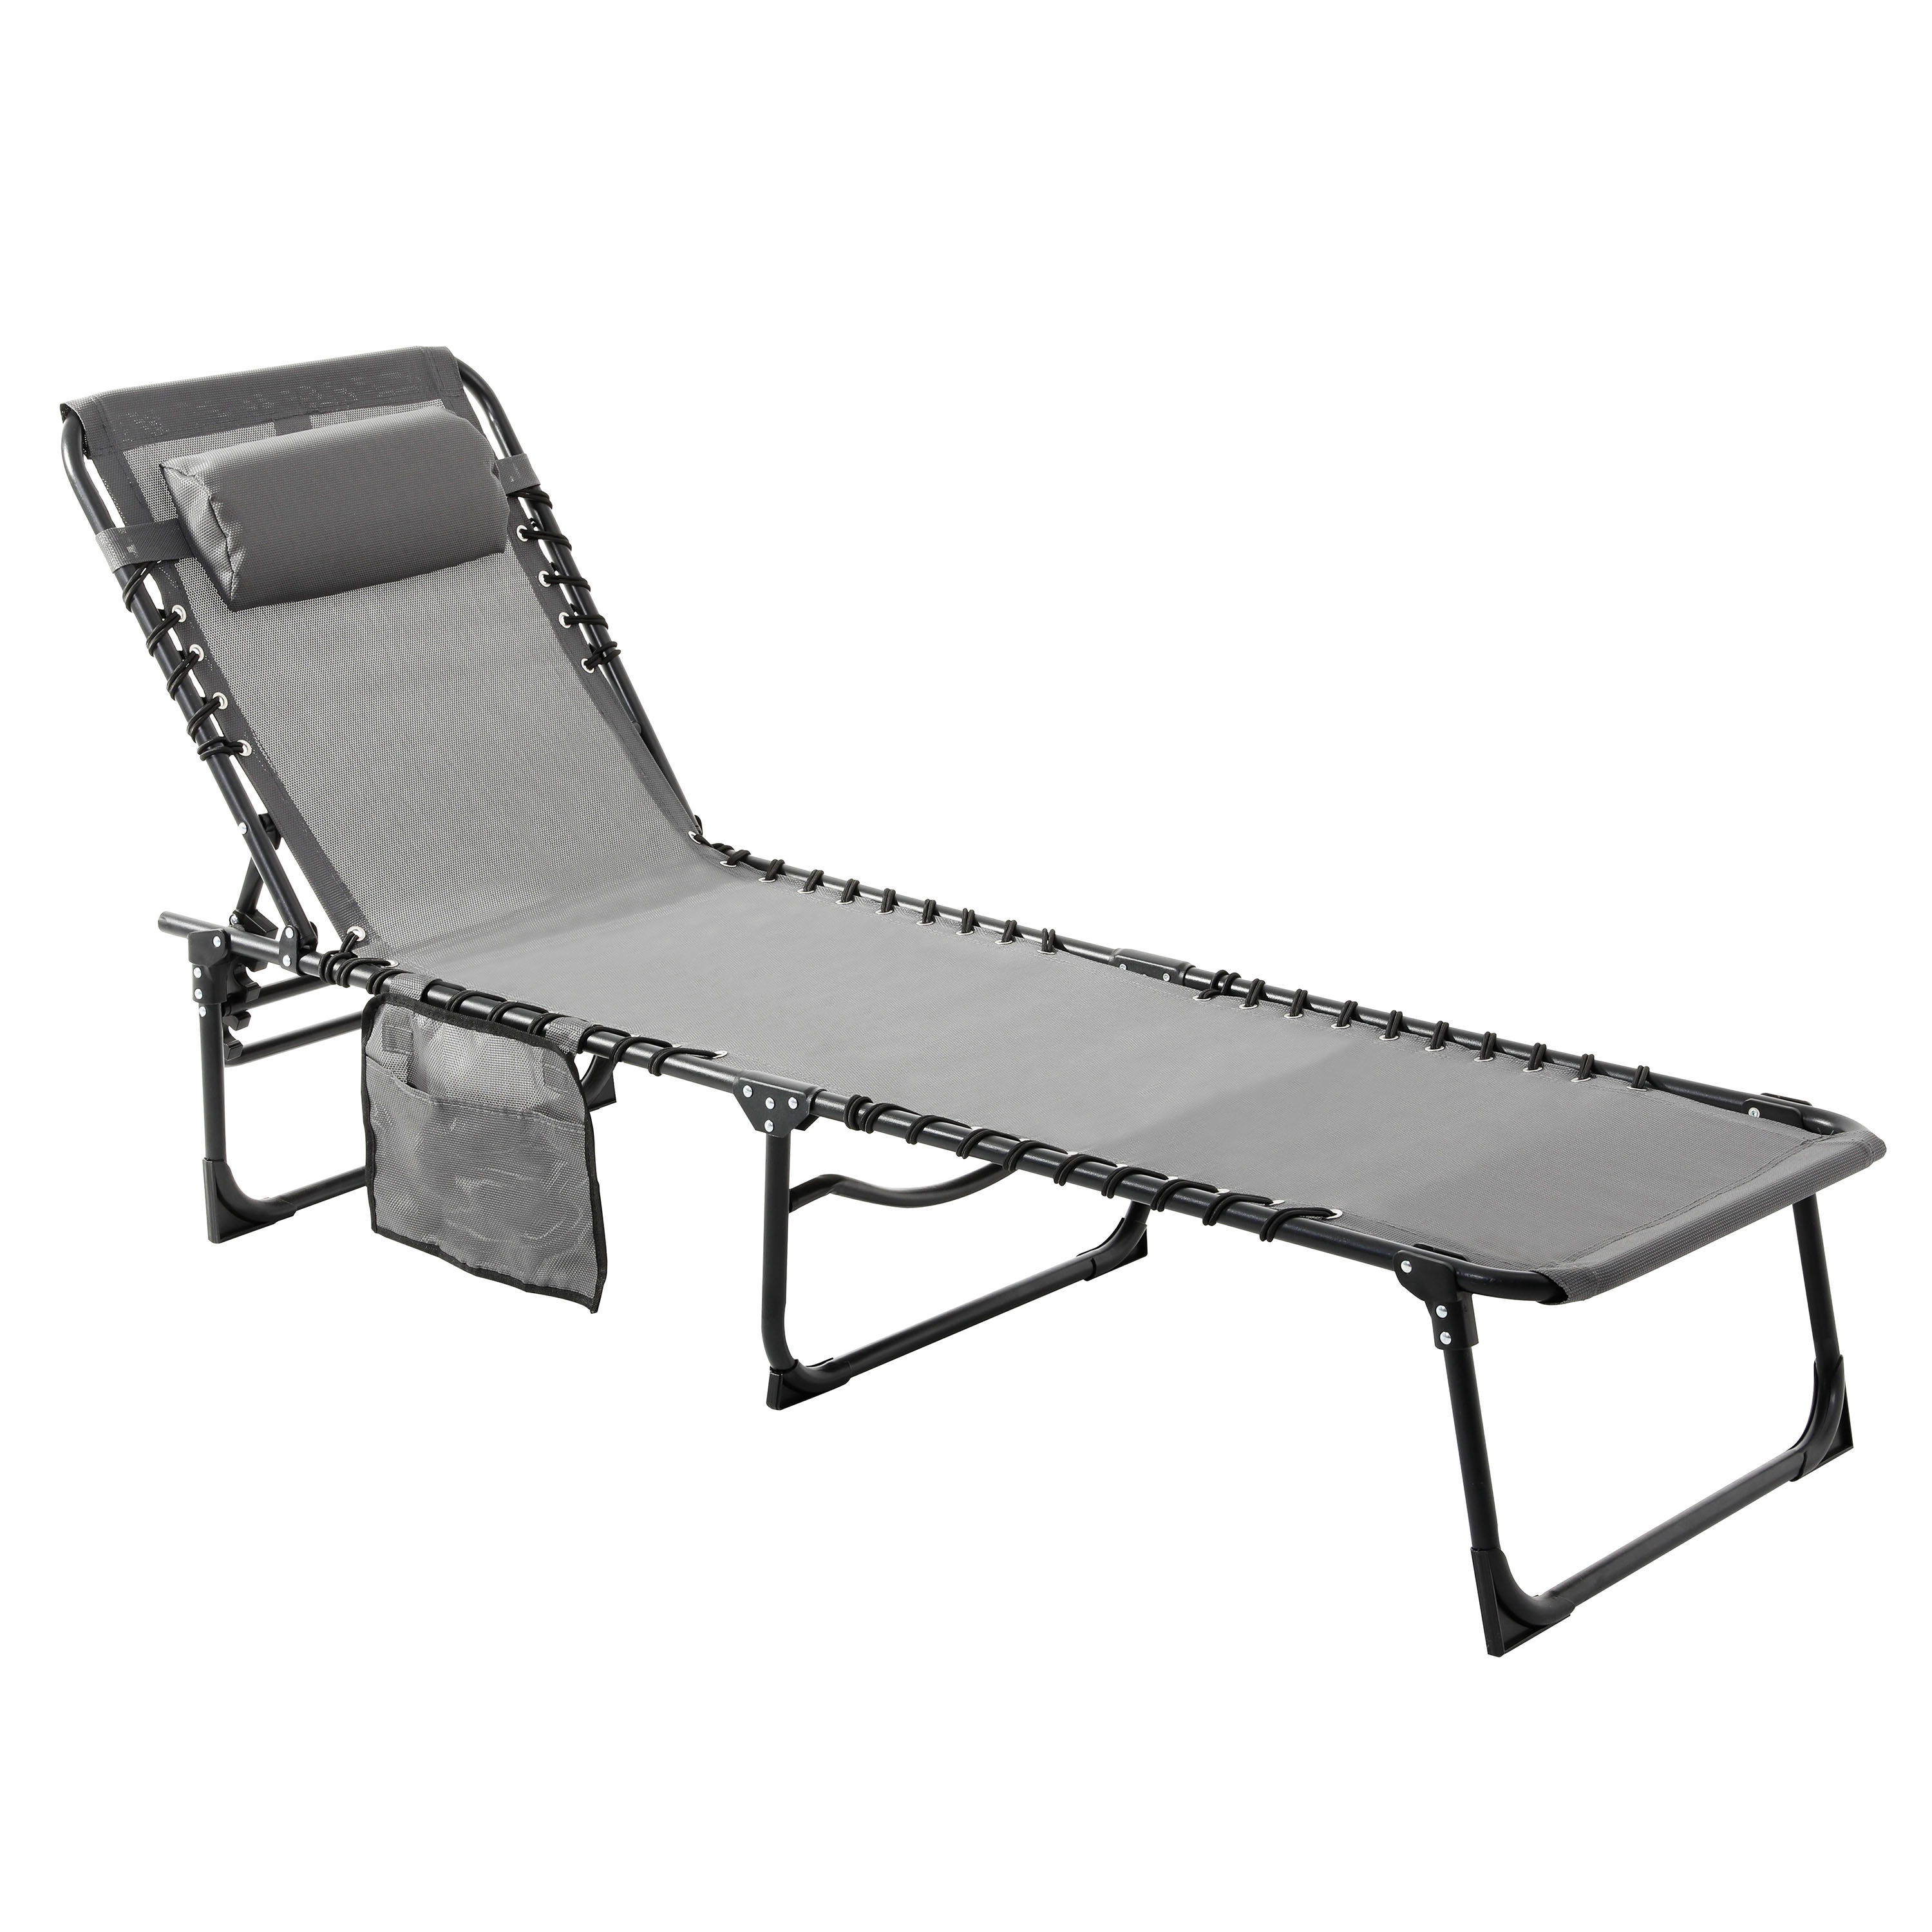 heldin Overstijgen Kosmisch VEIKOUS Outdoor Chaise Lounge Chair 4-Fold for Patio with Detachable Pocket  and Pillow, Gray in the Patio Chairs department at Lowes.com